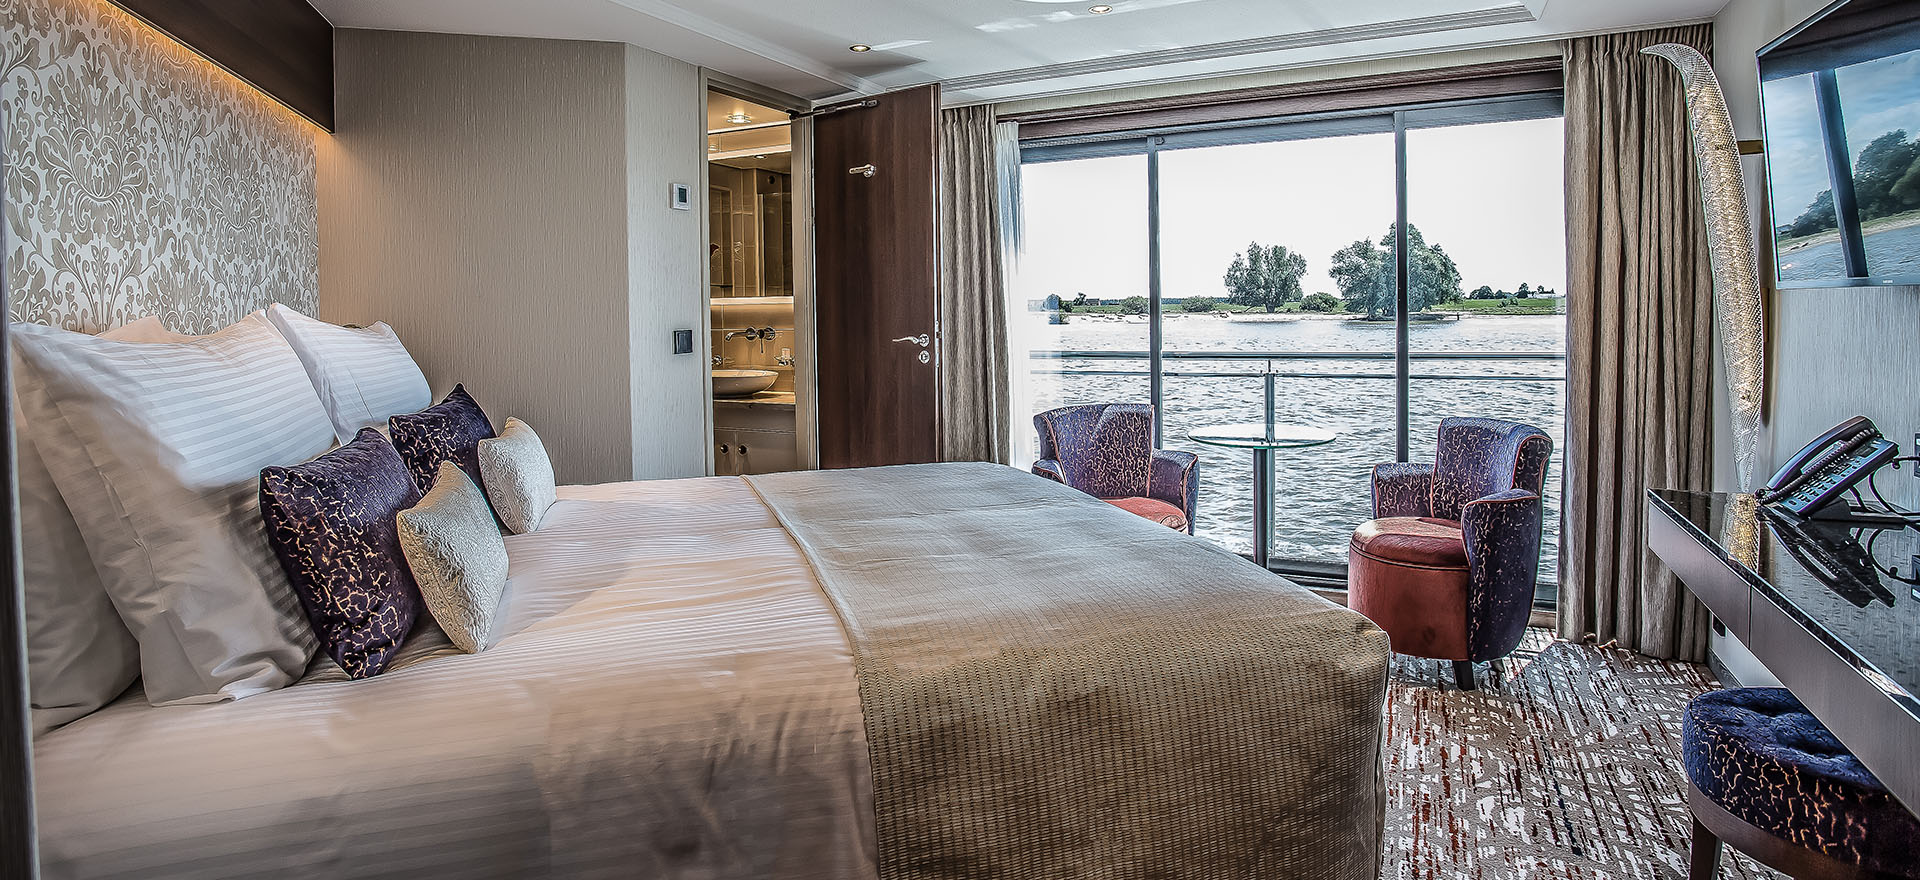 Deluxe suite with floor-to-ceiling windows and double bed